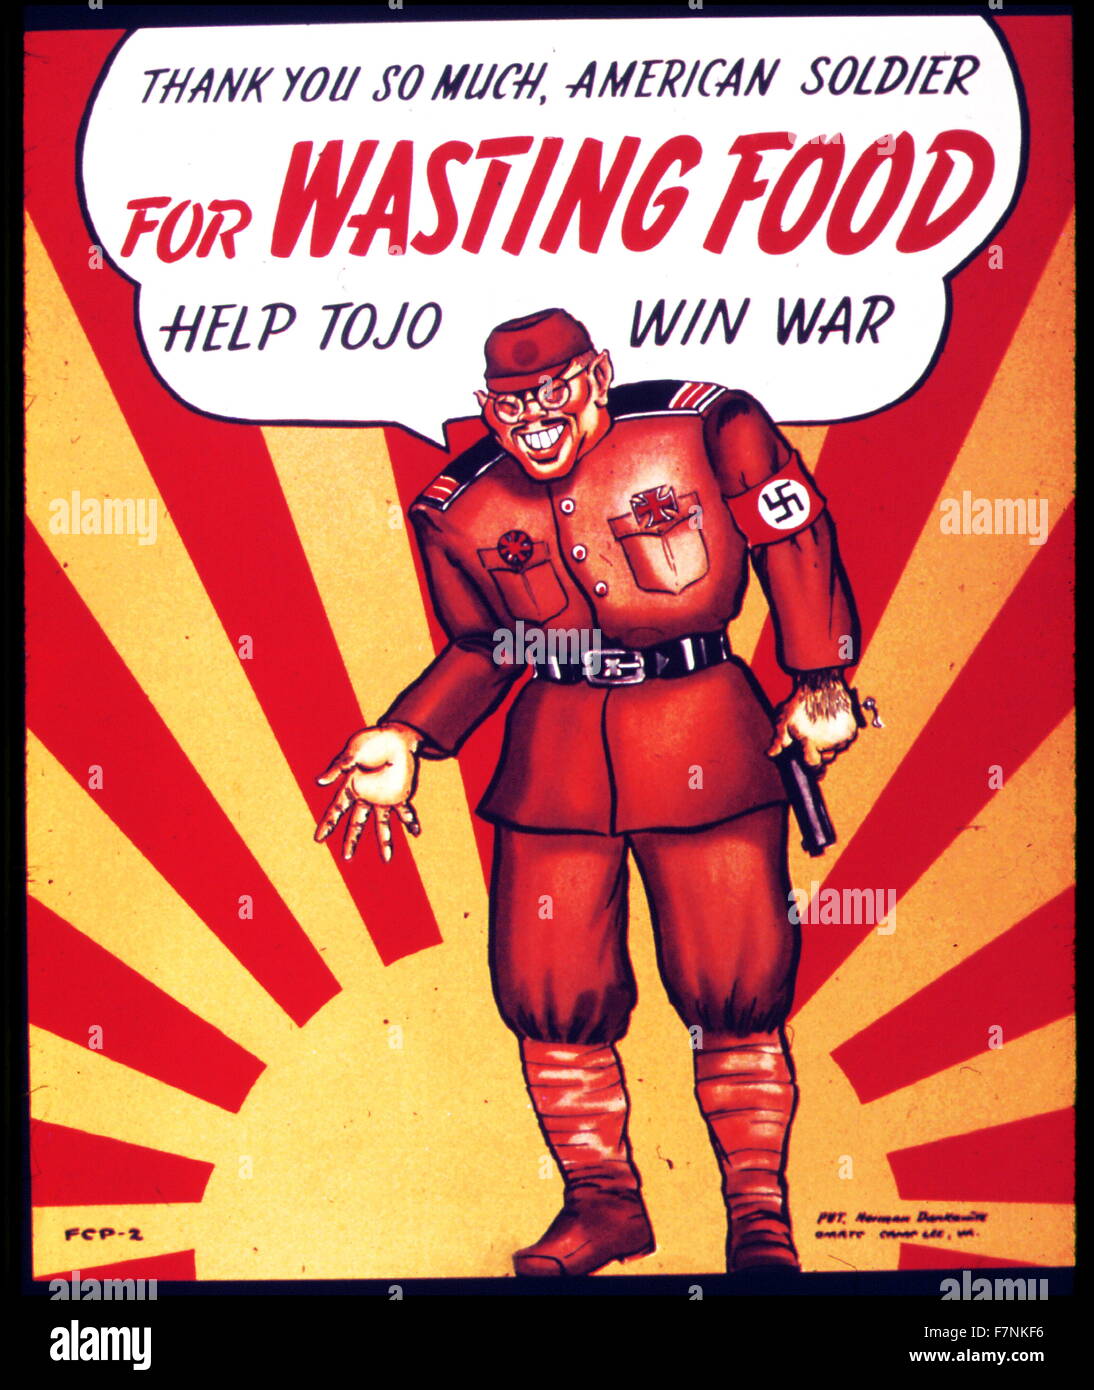 World War two American anti-Japanese, propaganda poster. 'THANK YOU SO MUCH AMERICAN SOLDIER FOR WASTING FOOD - HELP TOJO WIN WAR' Stock Photo